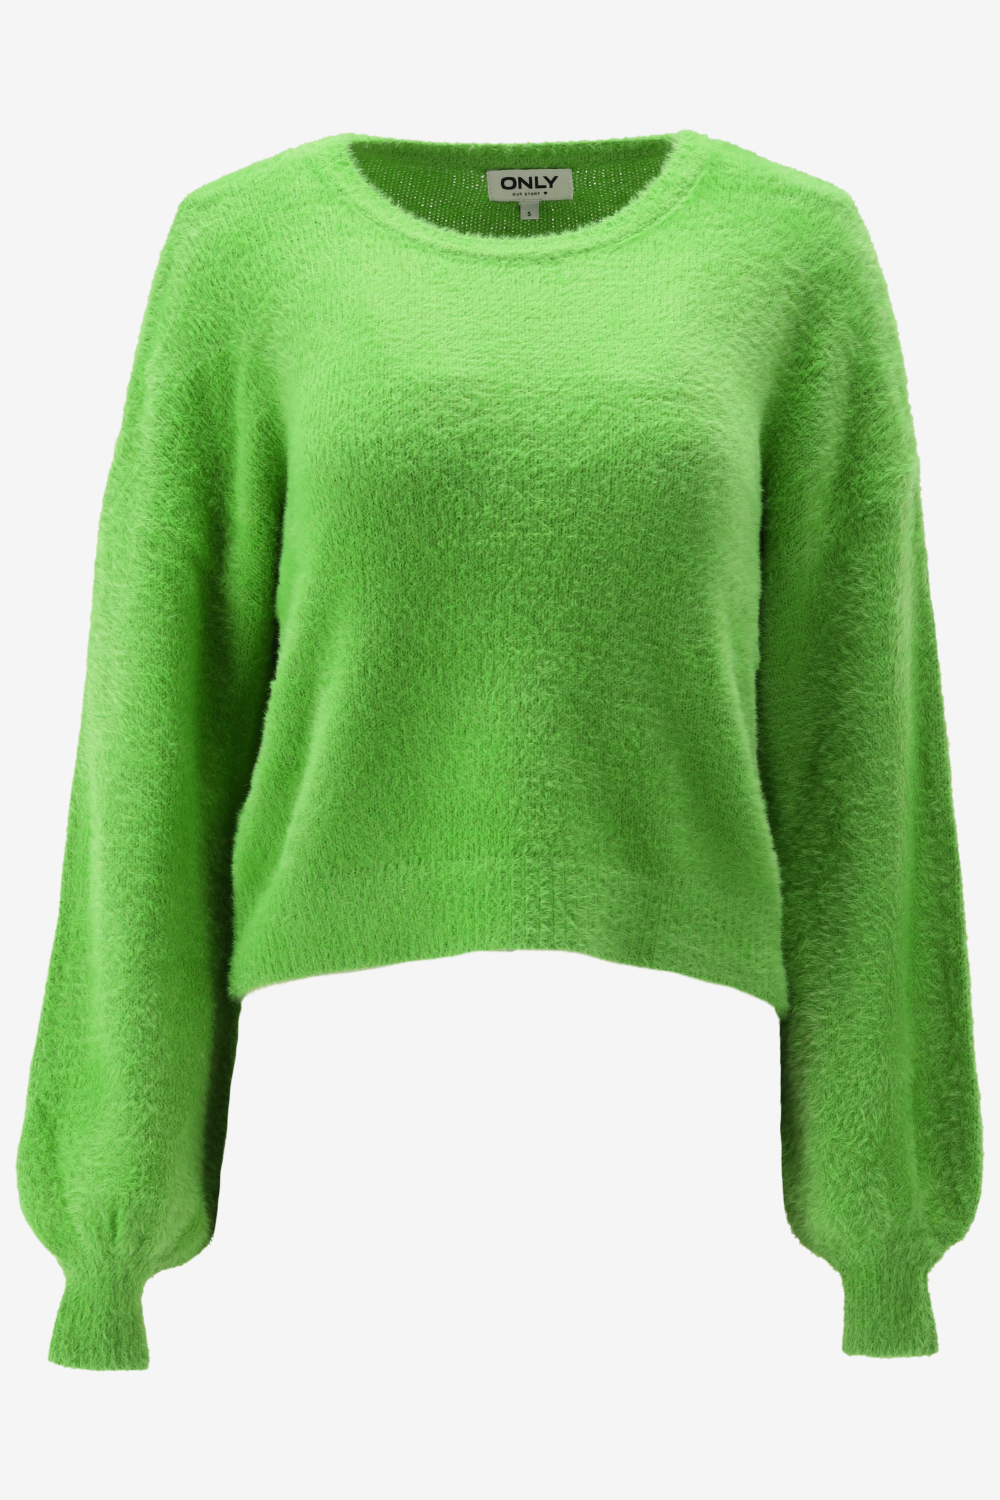 Only Piumo L/s Pullover Island Green GROEN S